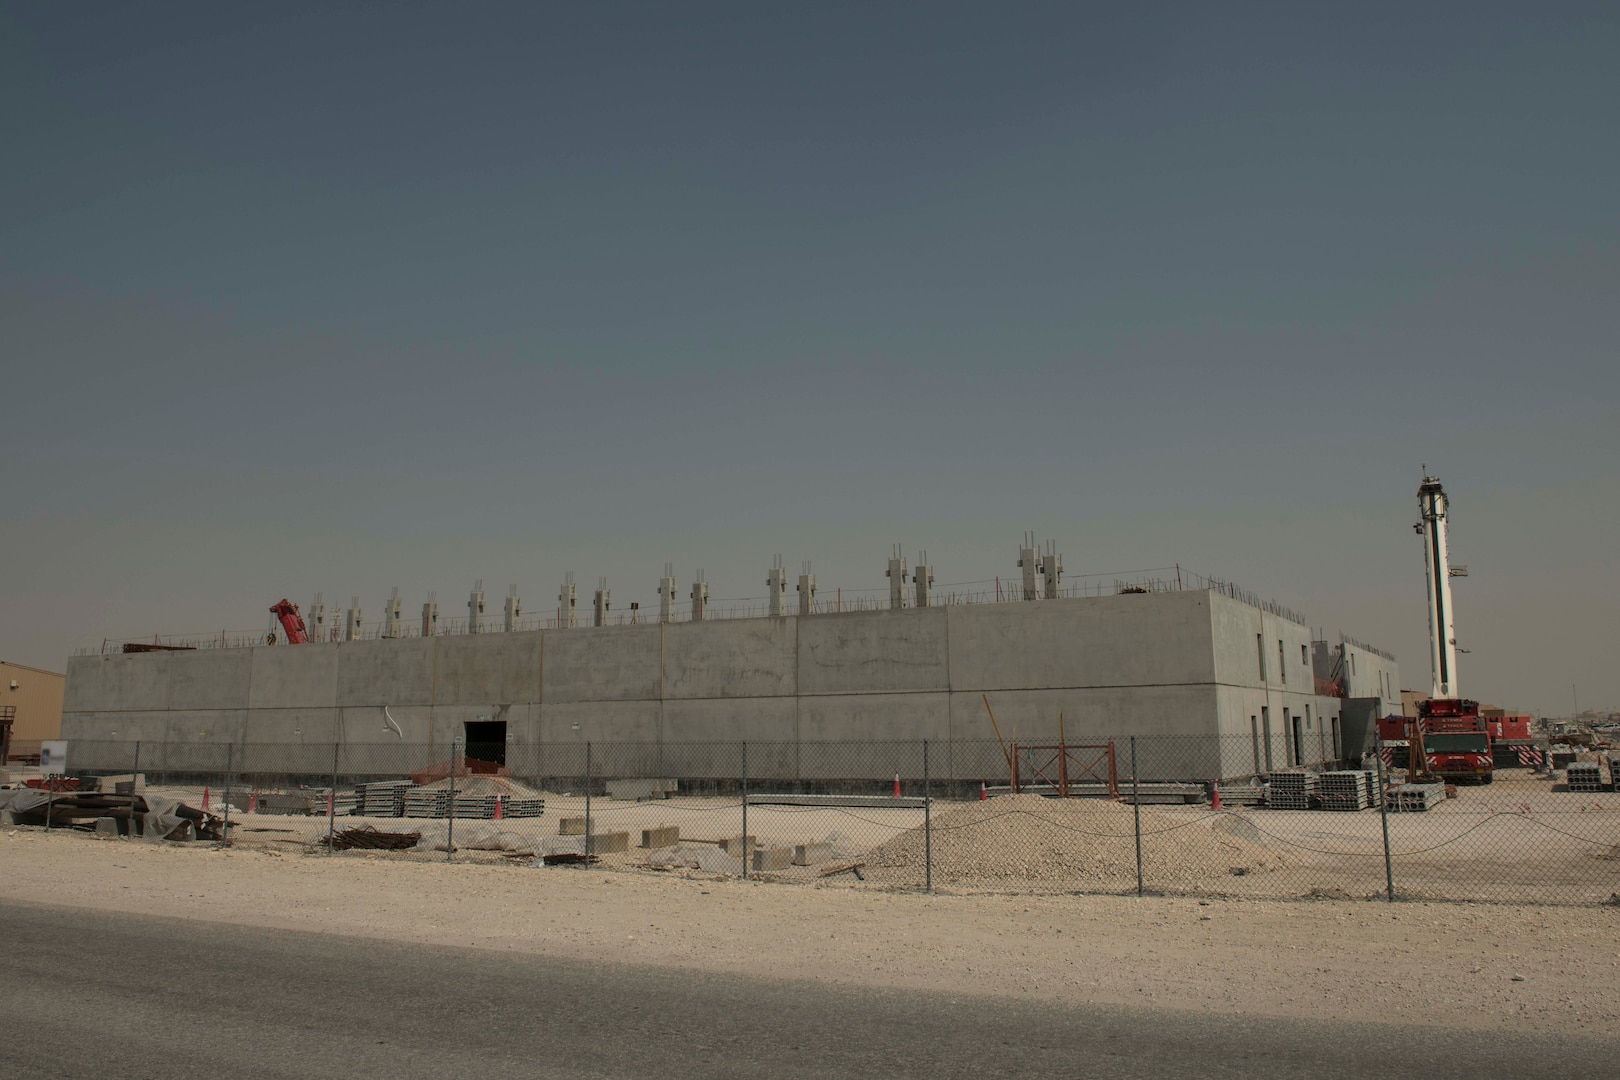 The construction of 10 state-of-the-art dormitories, two dining facilities, and four mission support facilities continues at Al Udeid Air Base, Qatar, May 29, 2020.